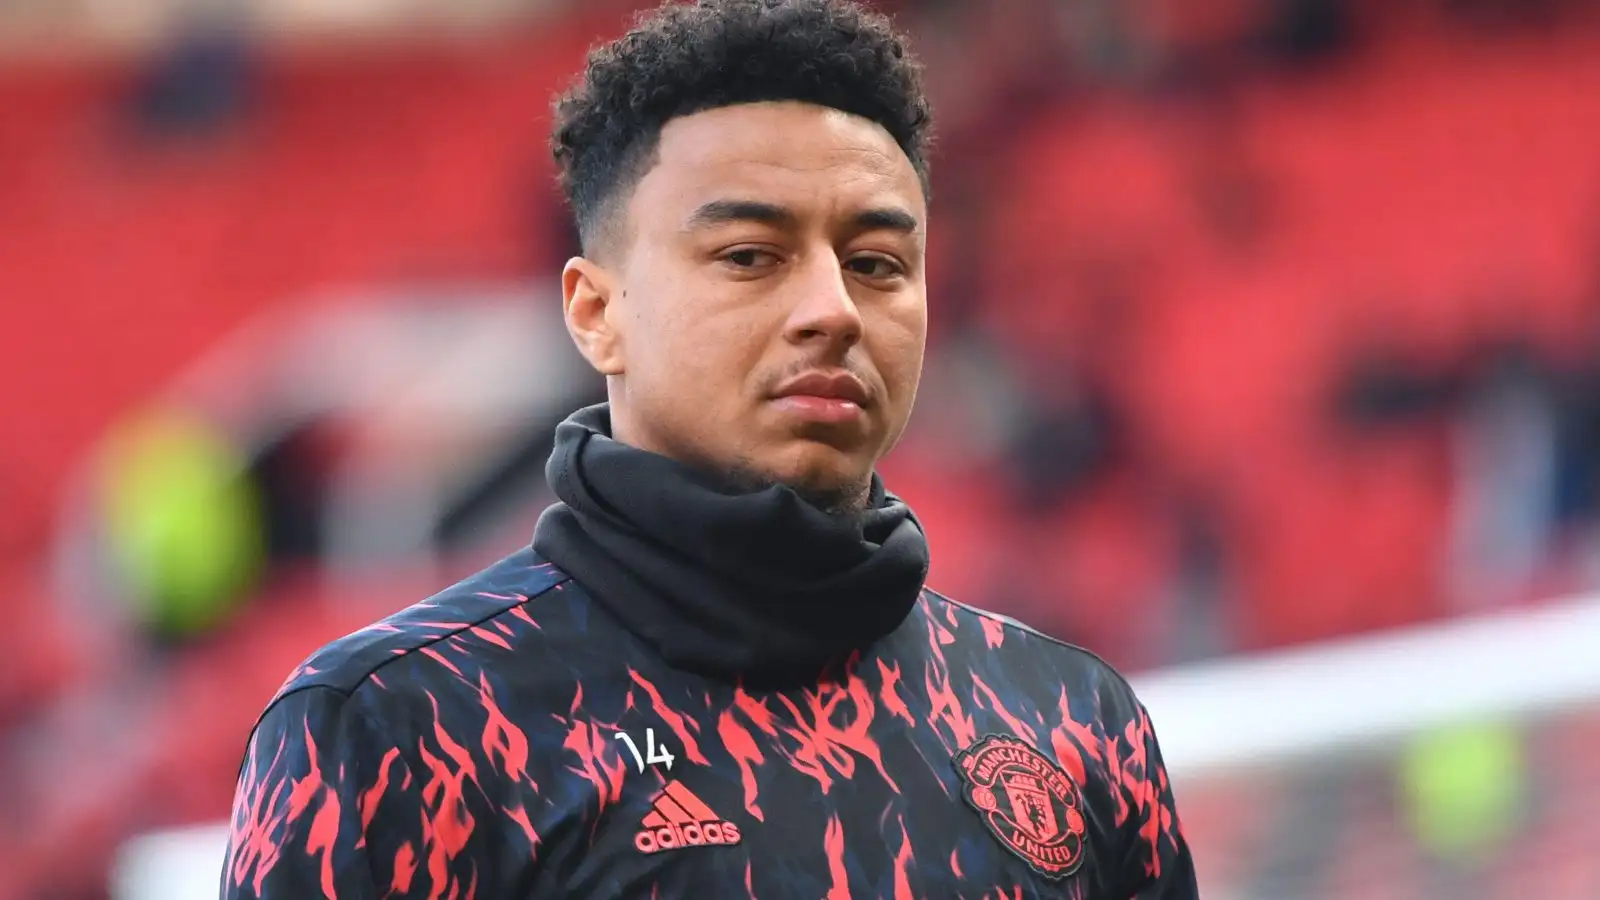 Jesse Lingard warms up before a Manchester United match.